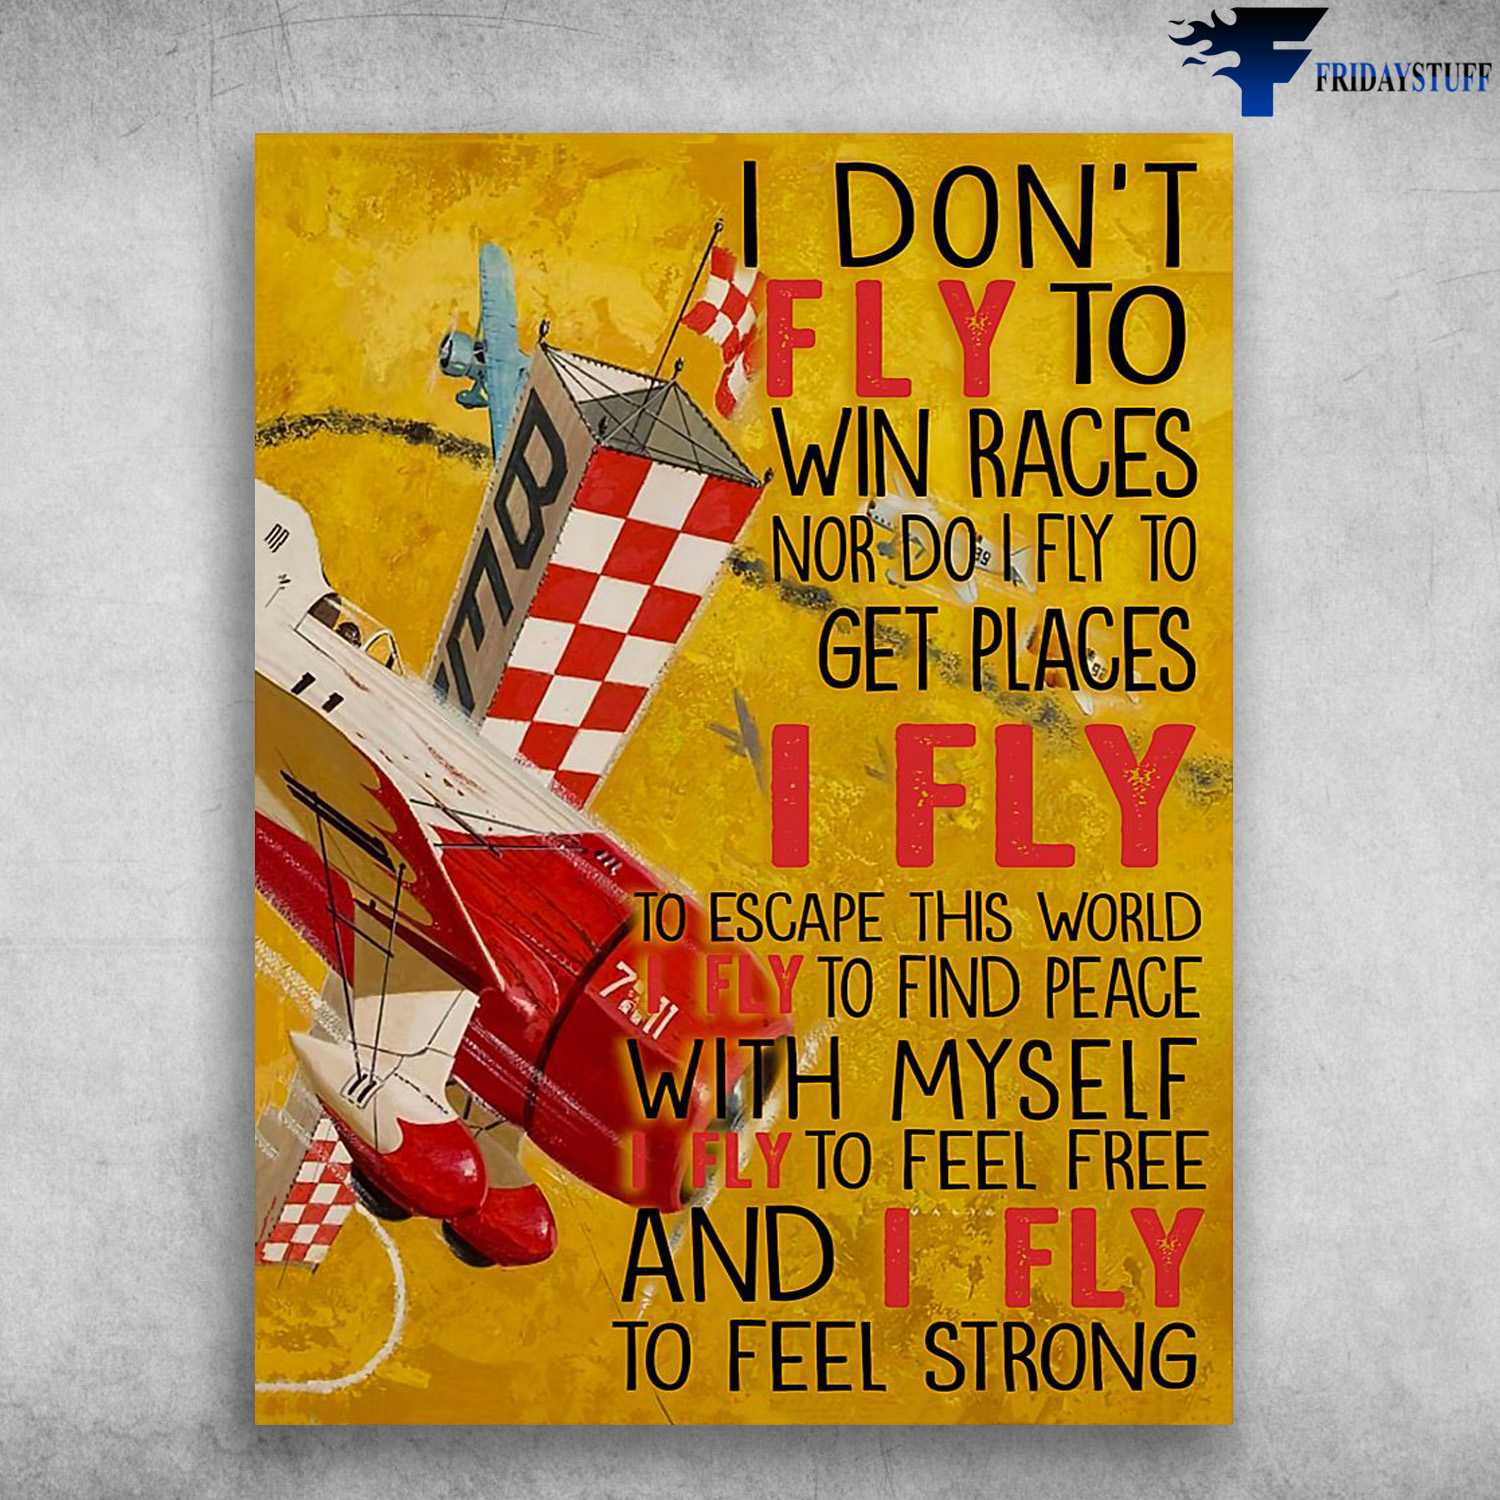 Pilot Poster, Pilot Lover - I Don't Fly To Win Races, Nor I Fly To Get Places, I Fly To Escape This World, I Fly To Find Peace, With Myself, I Fly To Feel Free, And I Fly To Feel Strong